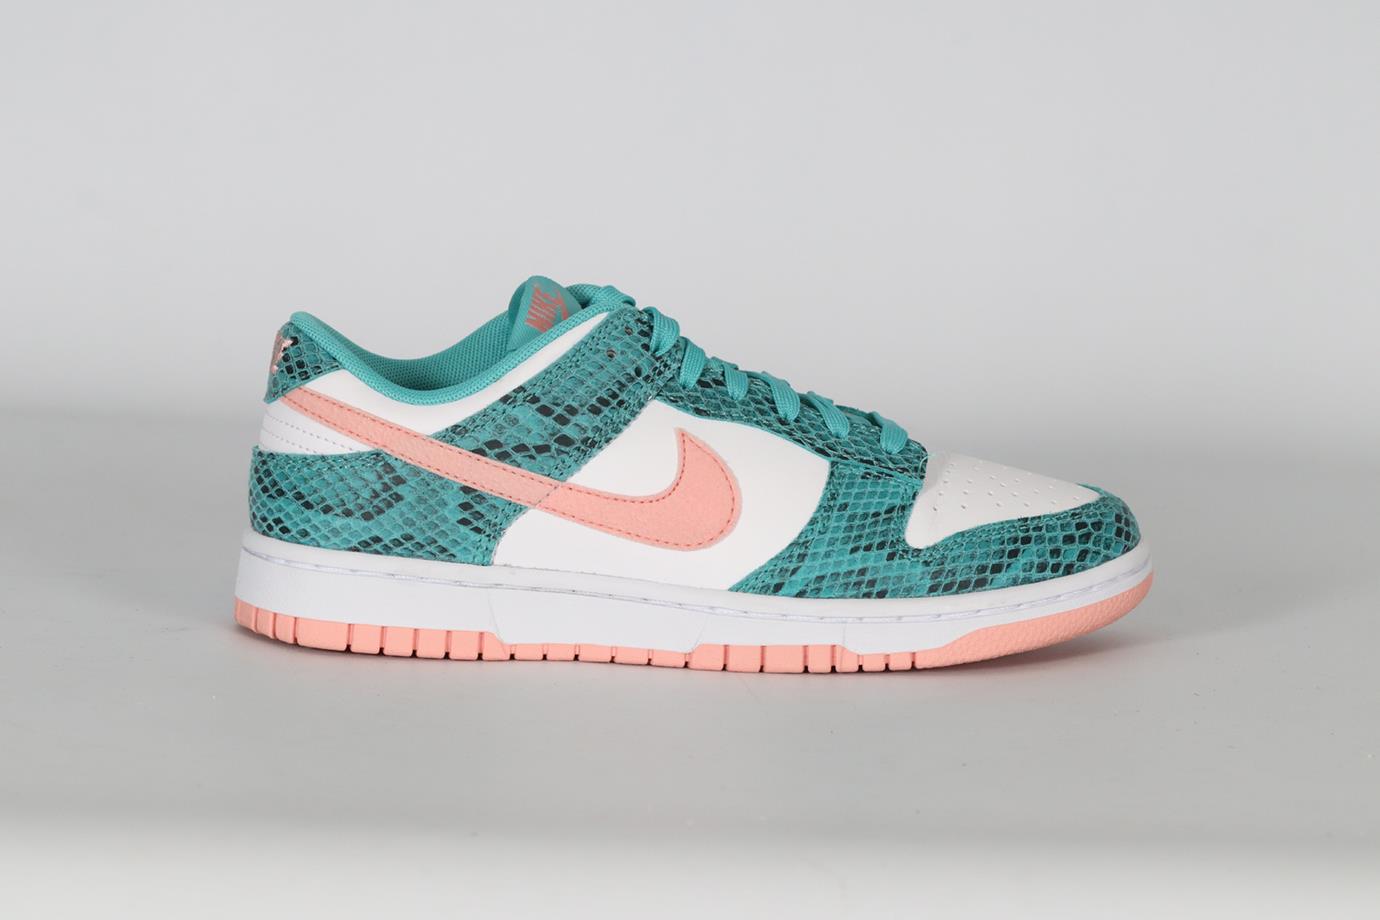 NIKE DUNK LOW WASHED TEAL LEATHER SNEAKERS EU 38.5 UK 5.5 US 8.5